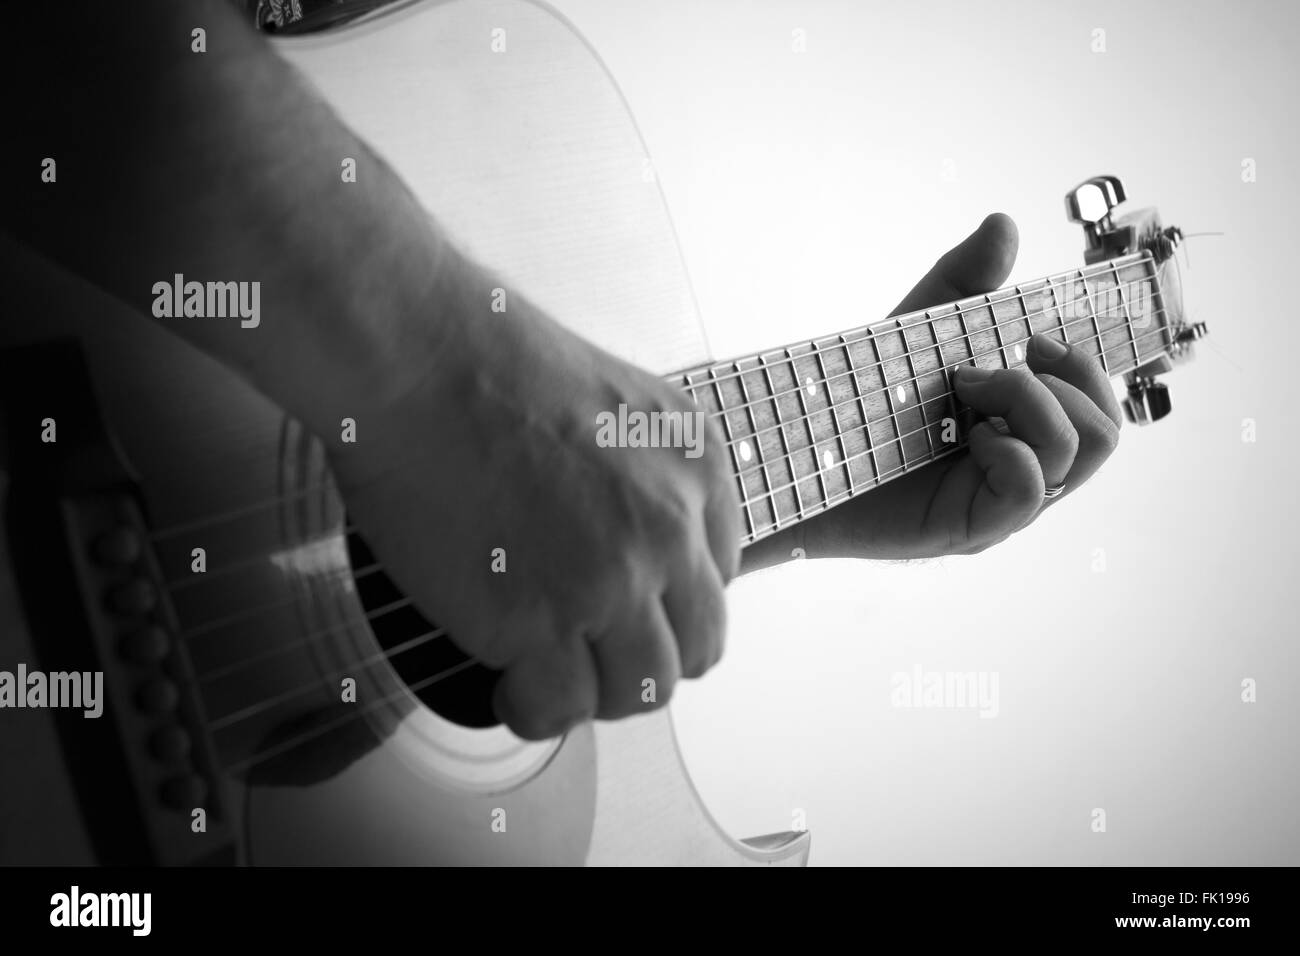 Black and white picture of a man playing the guitar, shallow depth of field Stock Photo